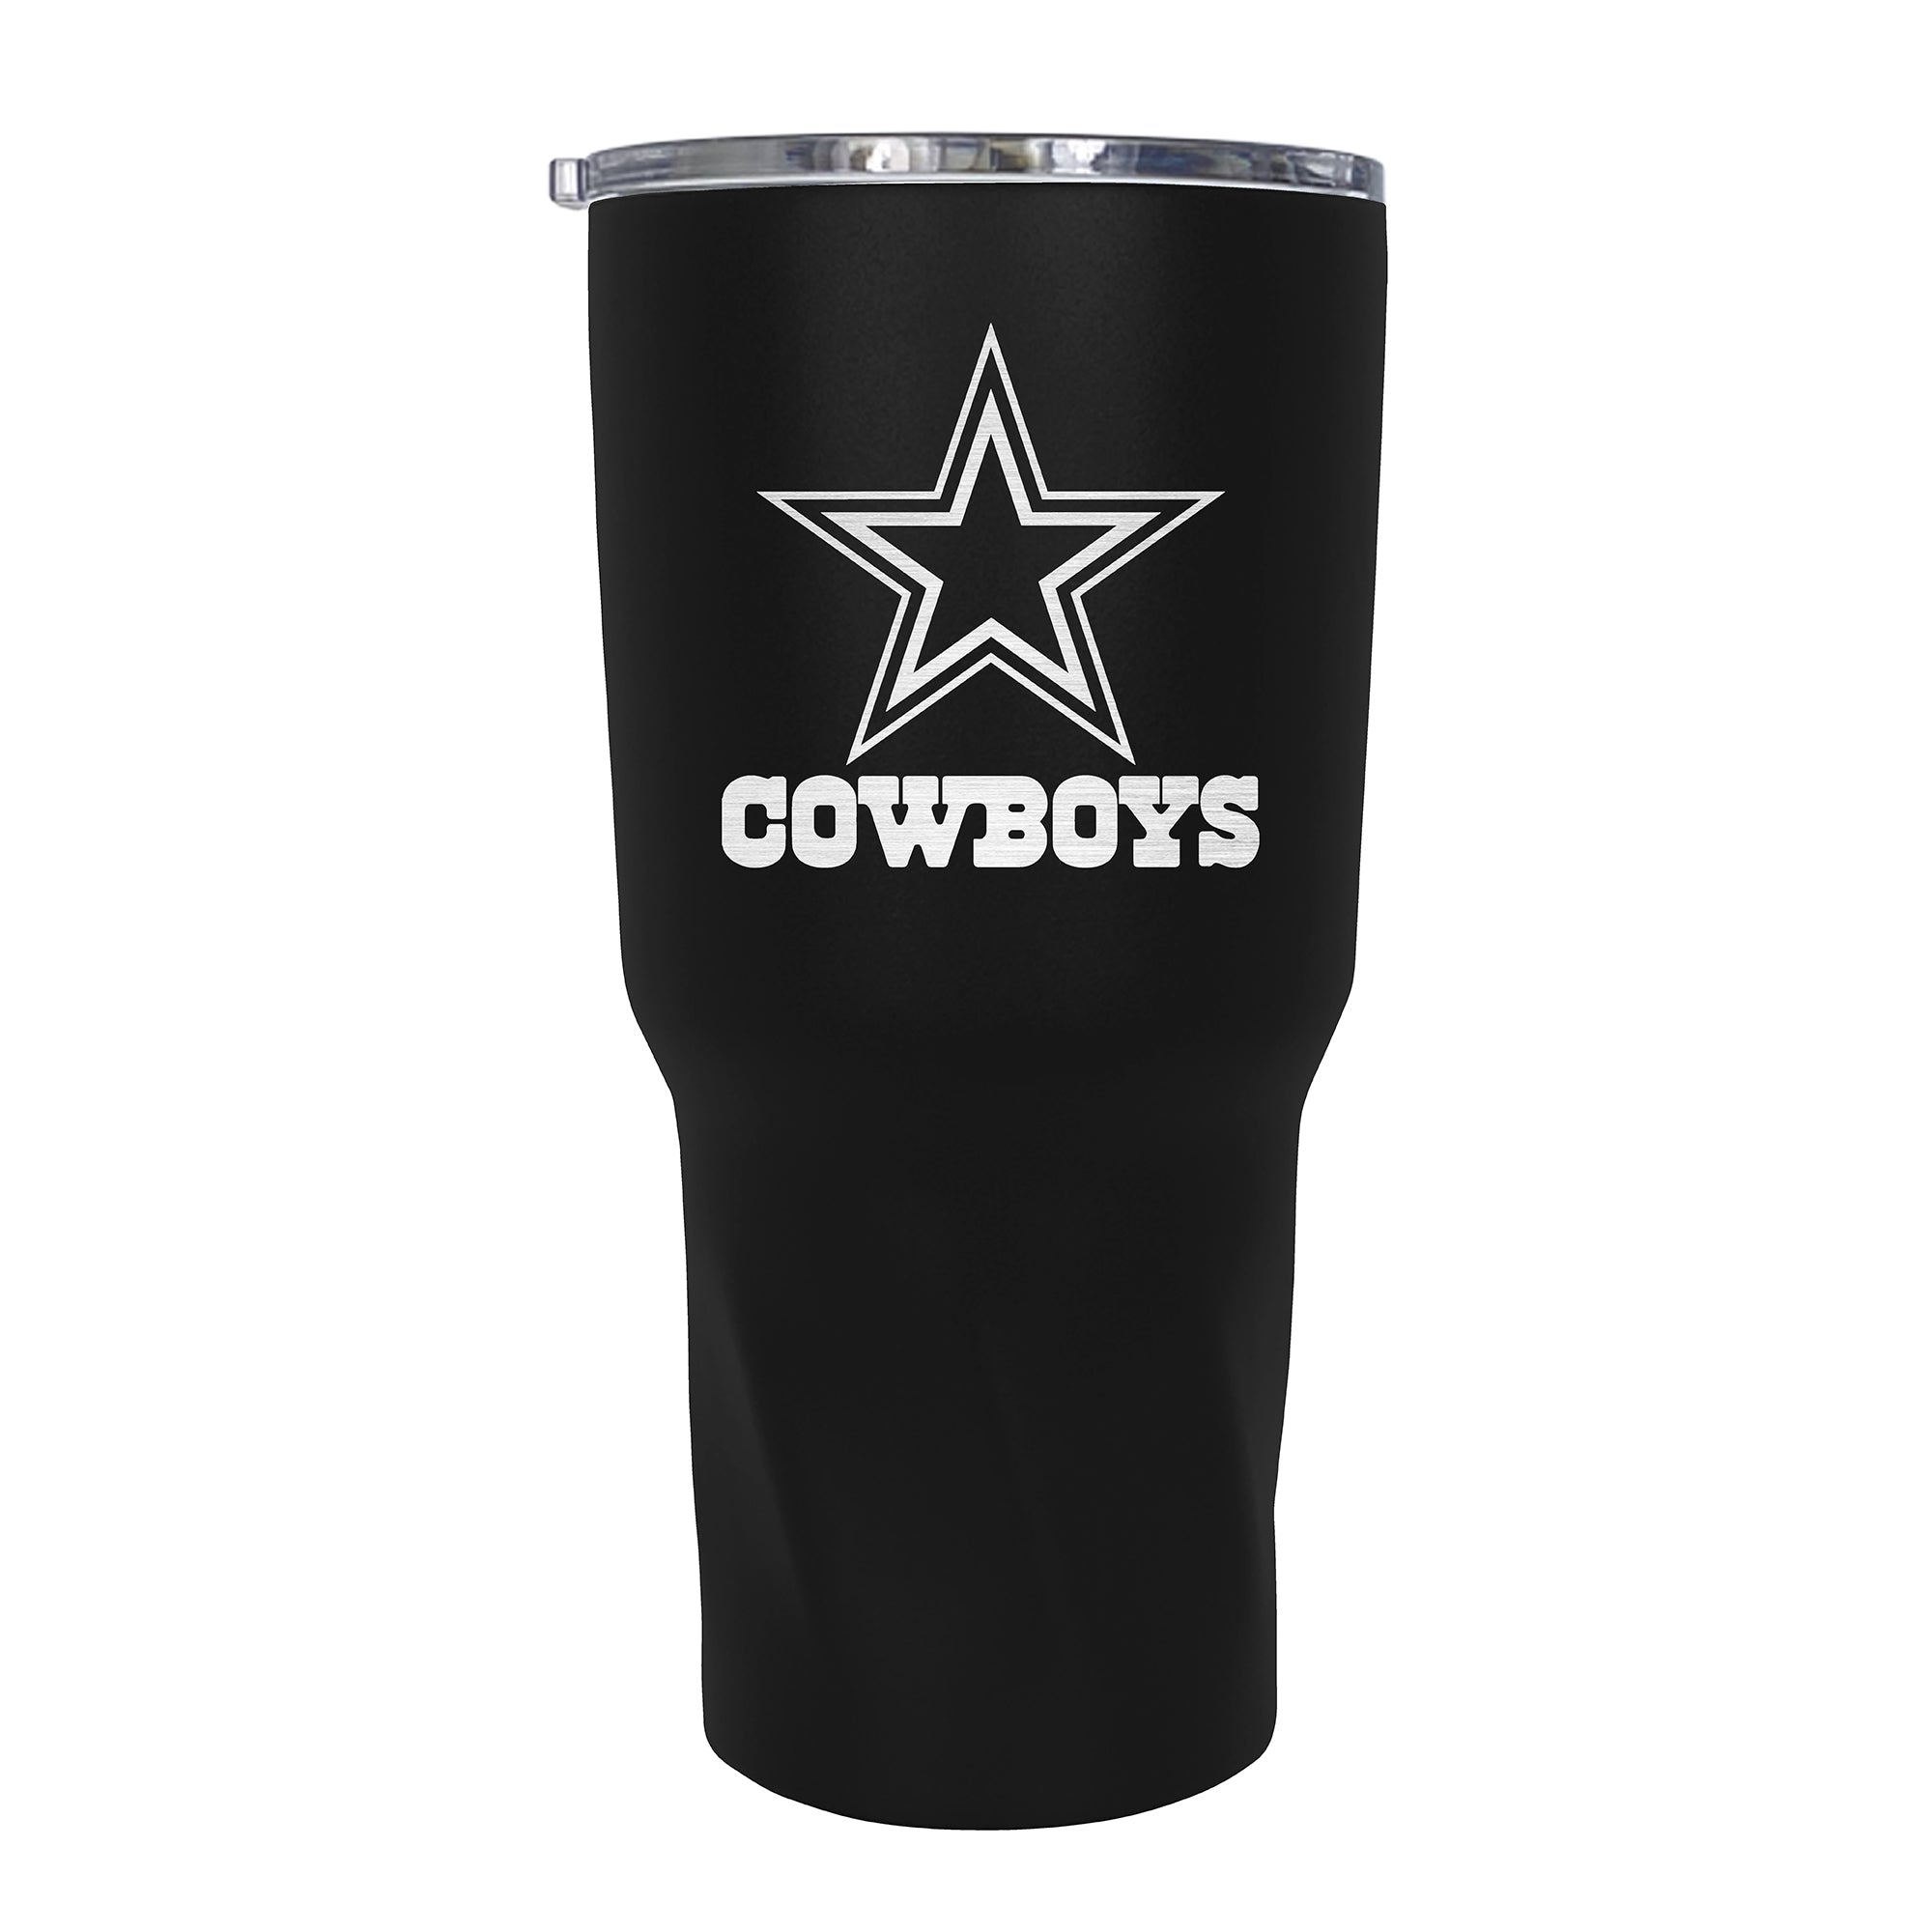 Dallas Cowboys 46 oz Colossal Stainless Steel Insulated Tumbler